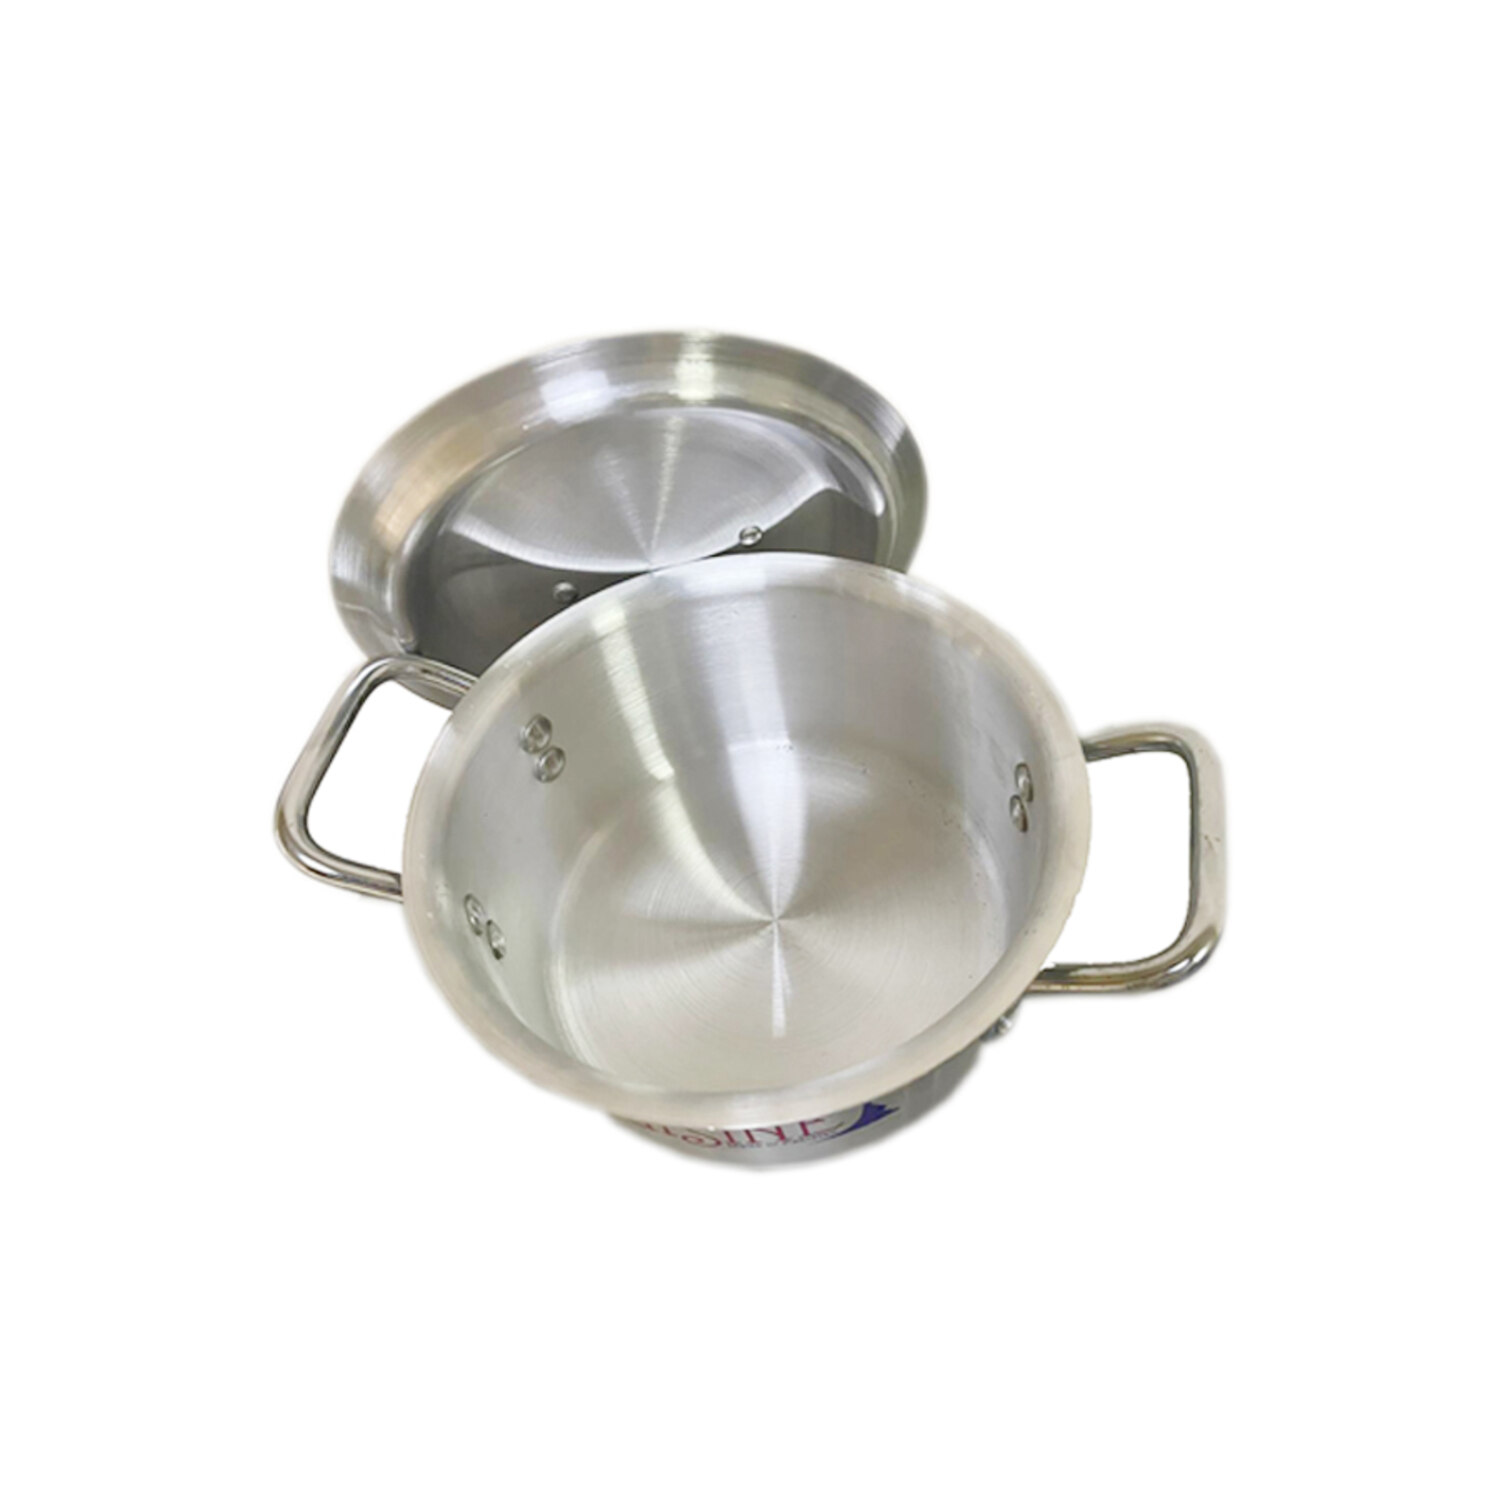 Royal Cuisine Metal Finish Chef Cooking Pots 4 Pcs Set 11x14 (Size 45/50/55/61) Cm With Durable Handles And Heavy Lids Original Made In Pakistan